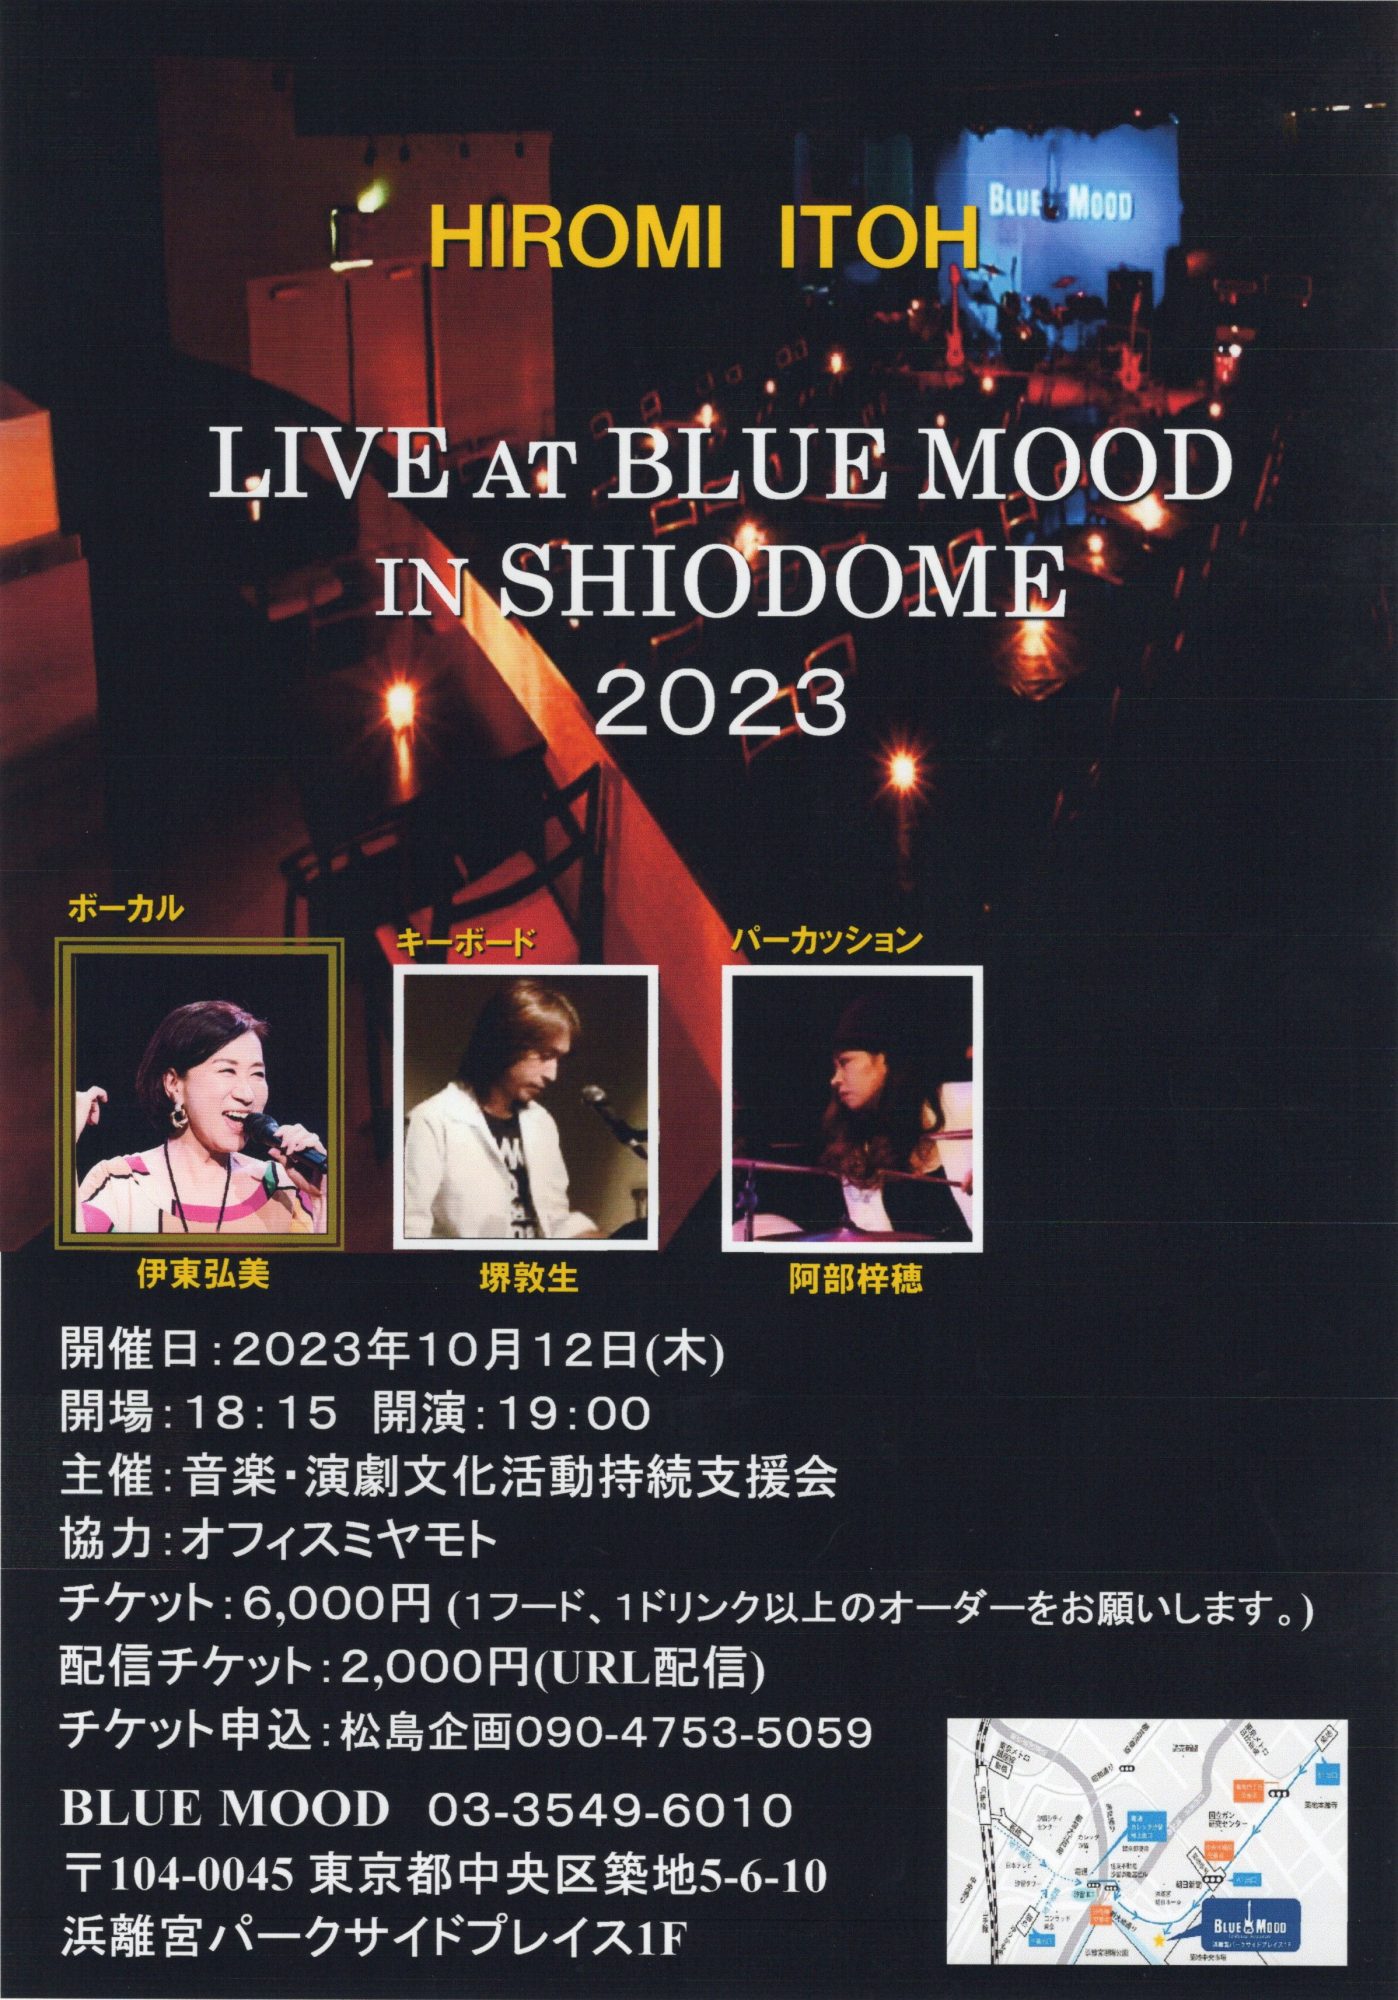 HIROMI ITOH LIVE AT BLUEMOOD IN SHIODOME 2023